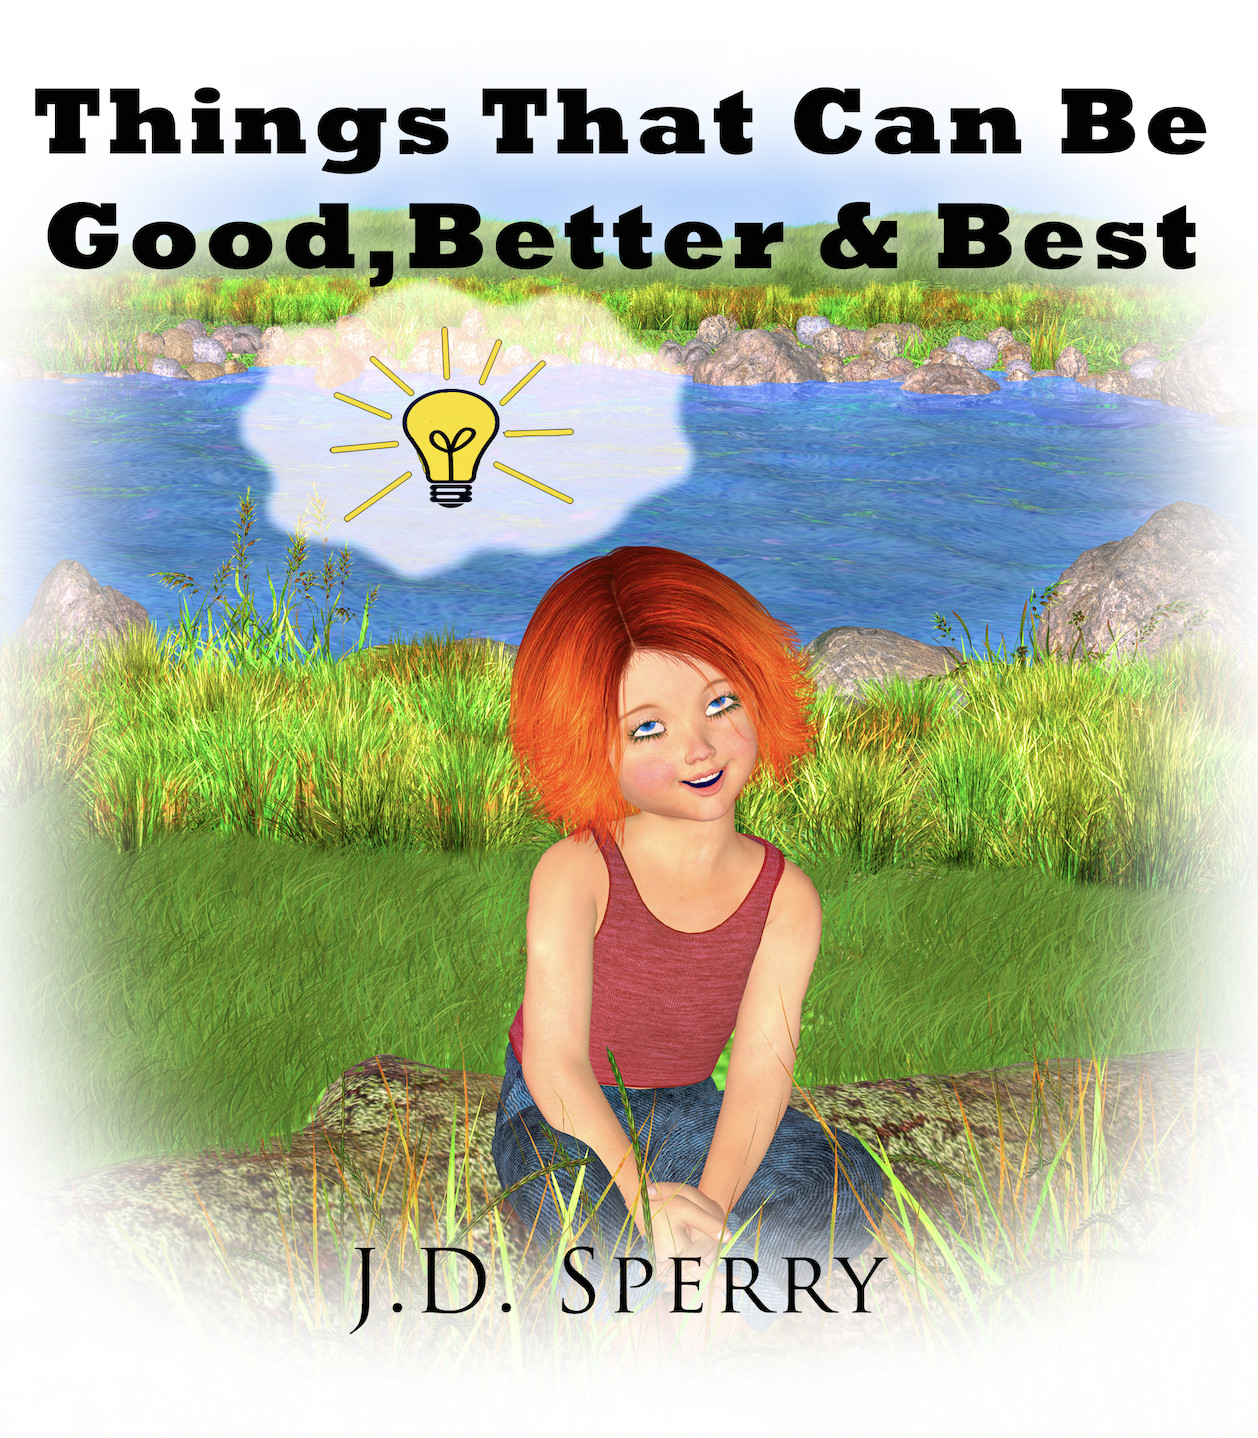 Things That Can Be Good, Better & Best by J.D. Sperry